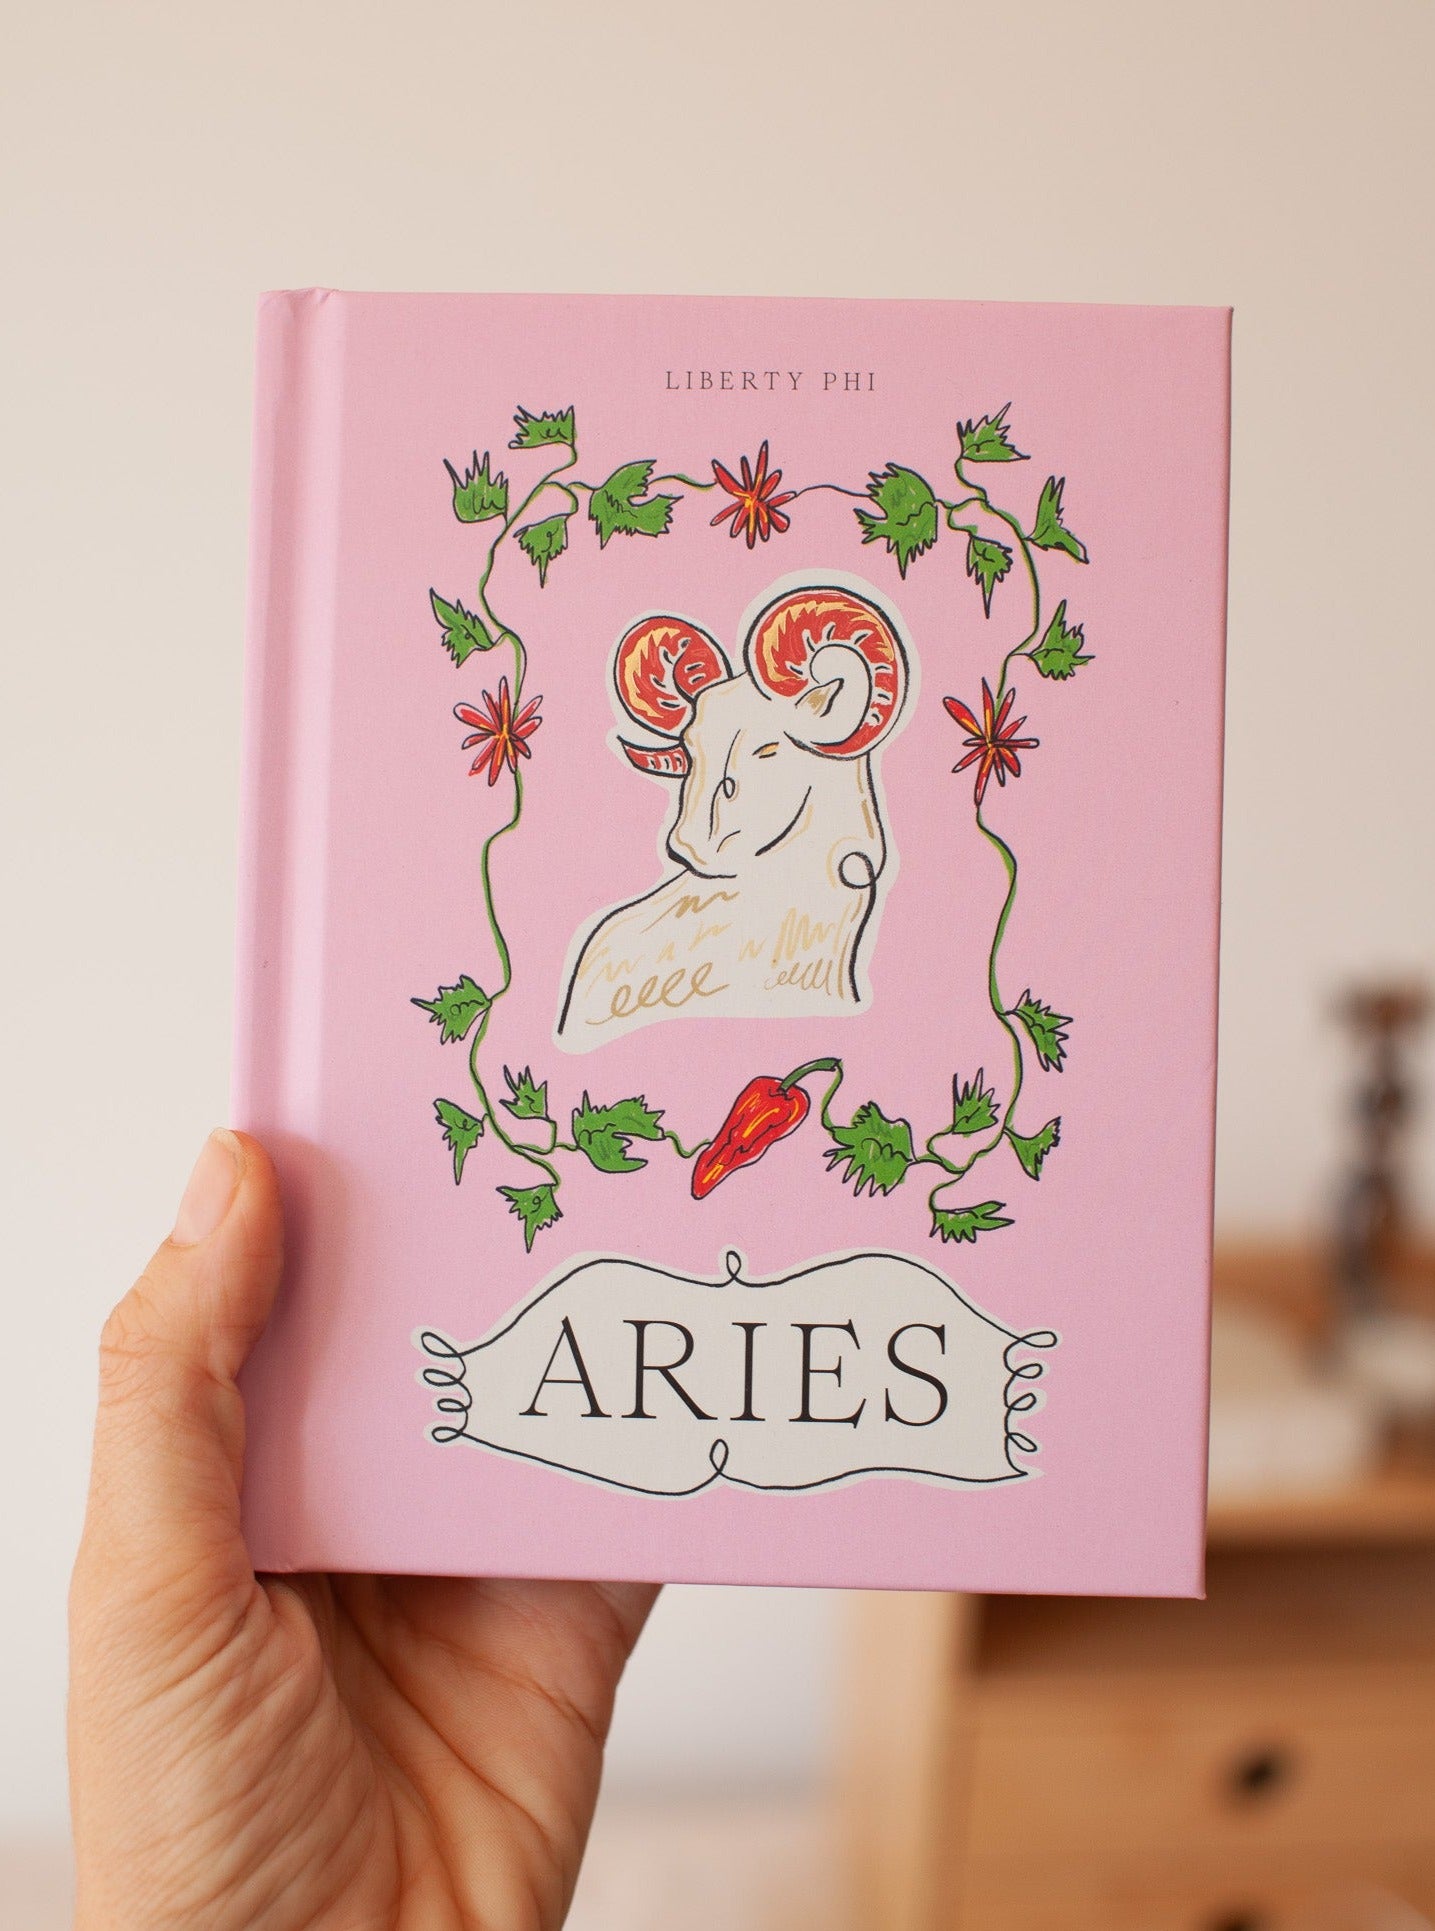 Aries Book by Liberty Phi